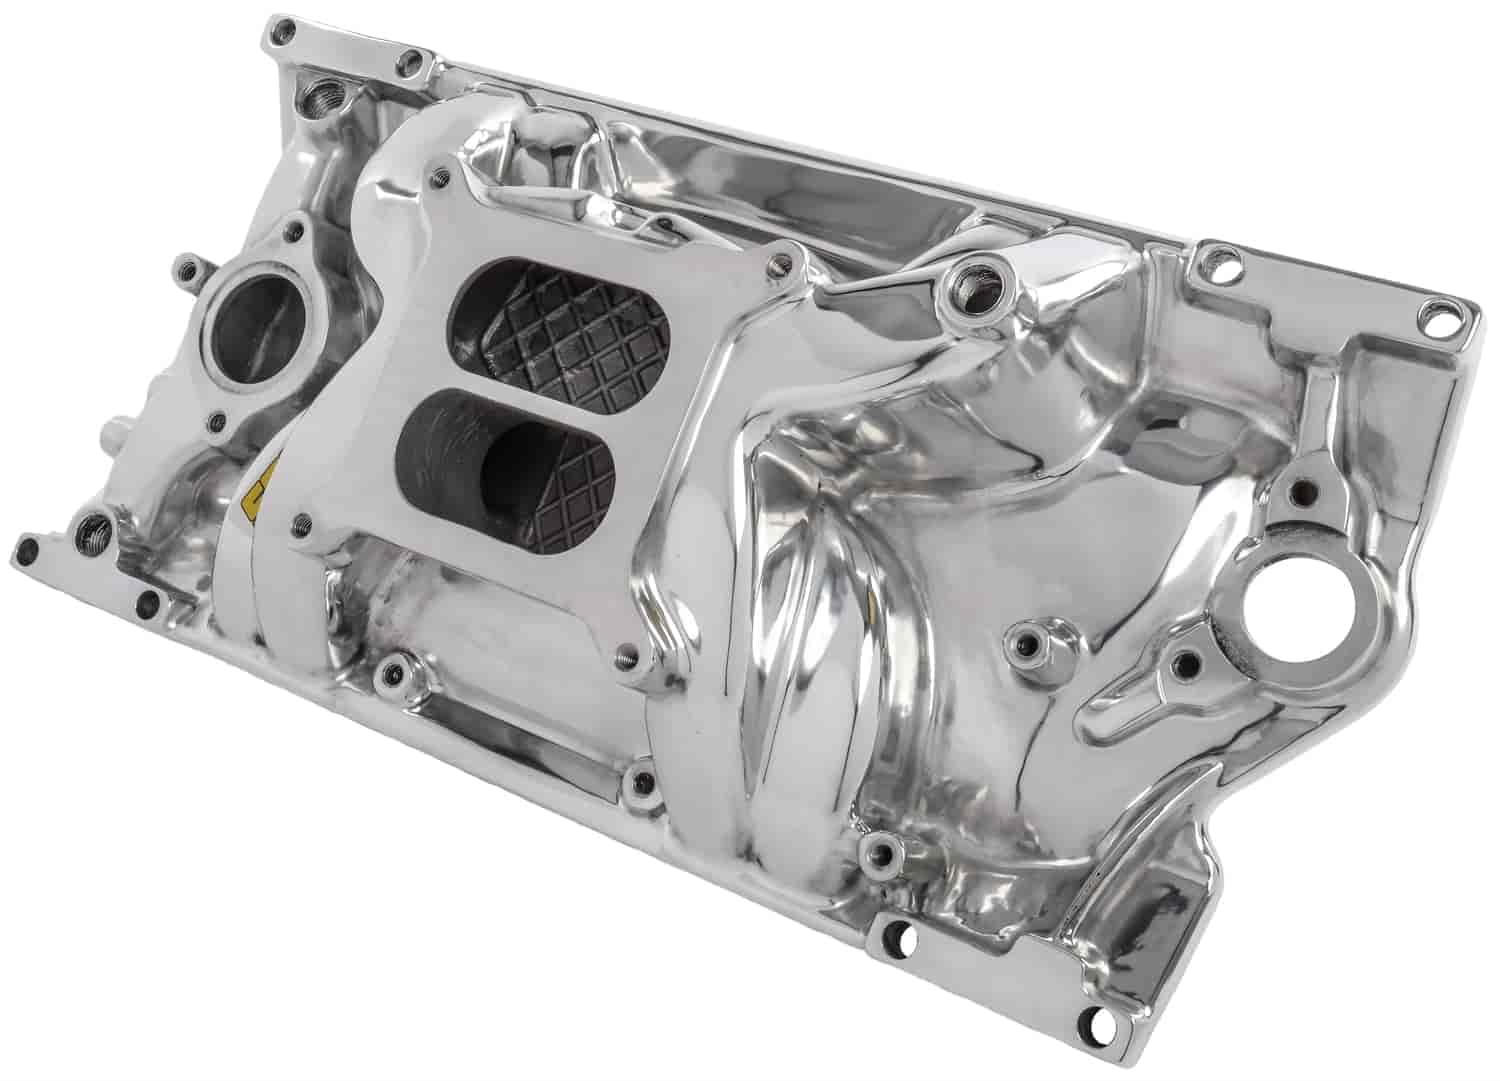 Intake Manifold for 1996-2002 Small Block Chevy 350 Vortec with L31 Cast Iron Heads, Dual Plane [Polished]